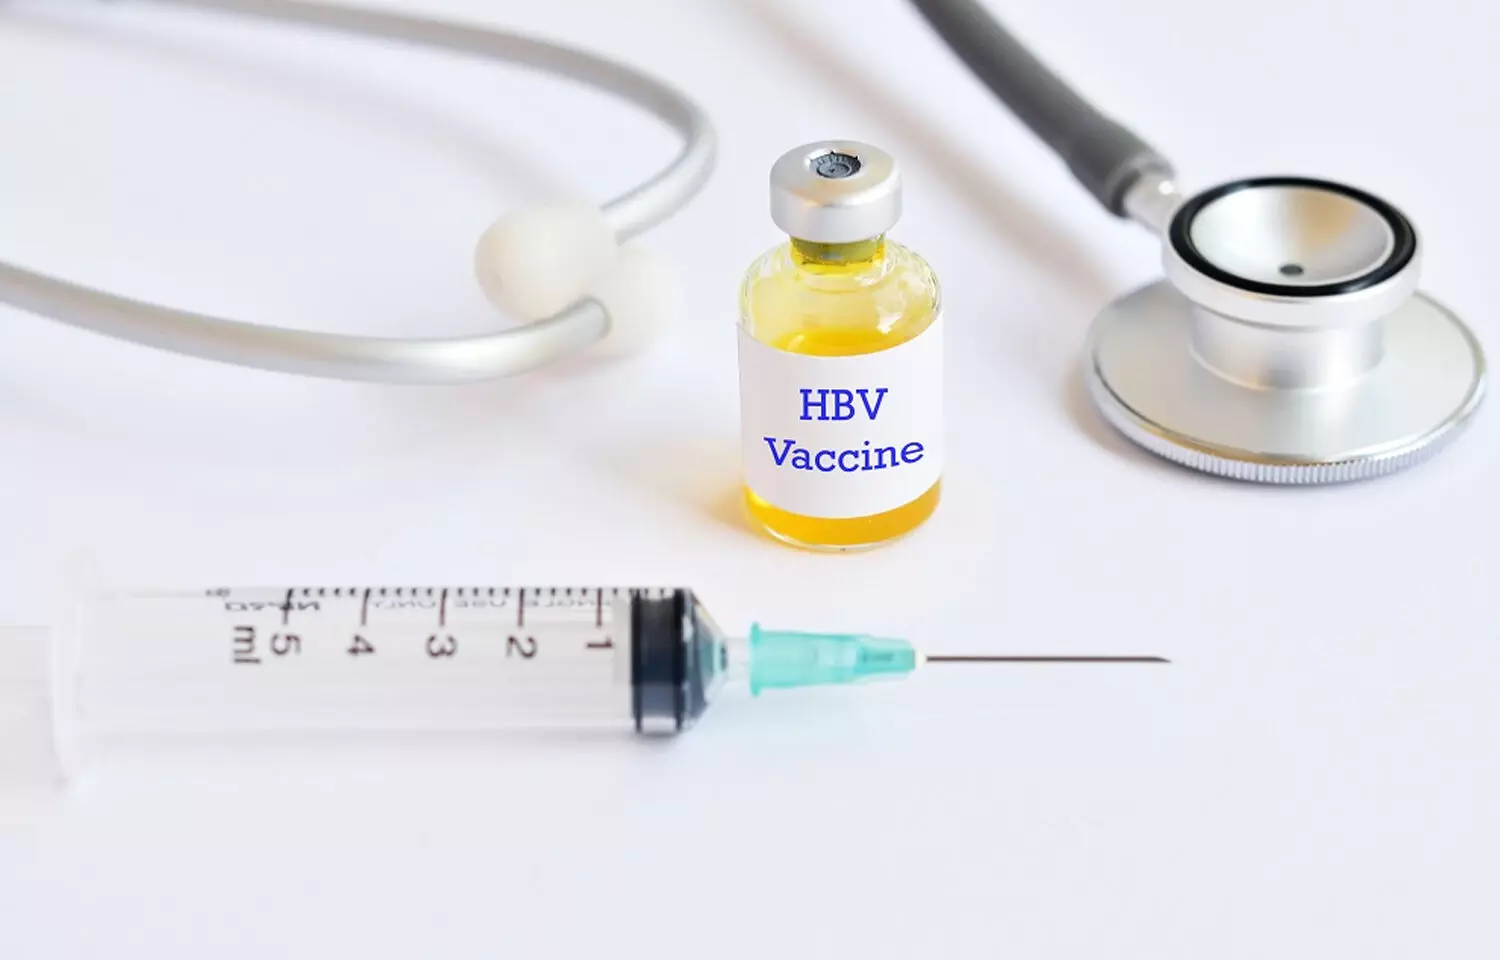 2 dose Hepatitis B vaccine not significantly associated with increased MI risk compared to 3 dose vaccine: JAMA